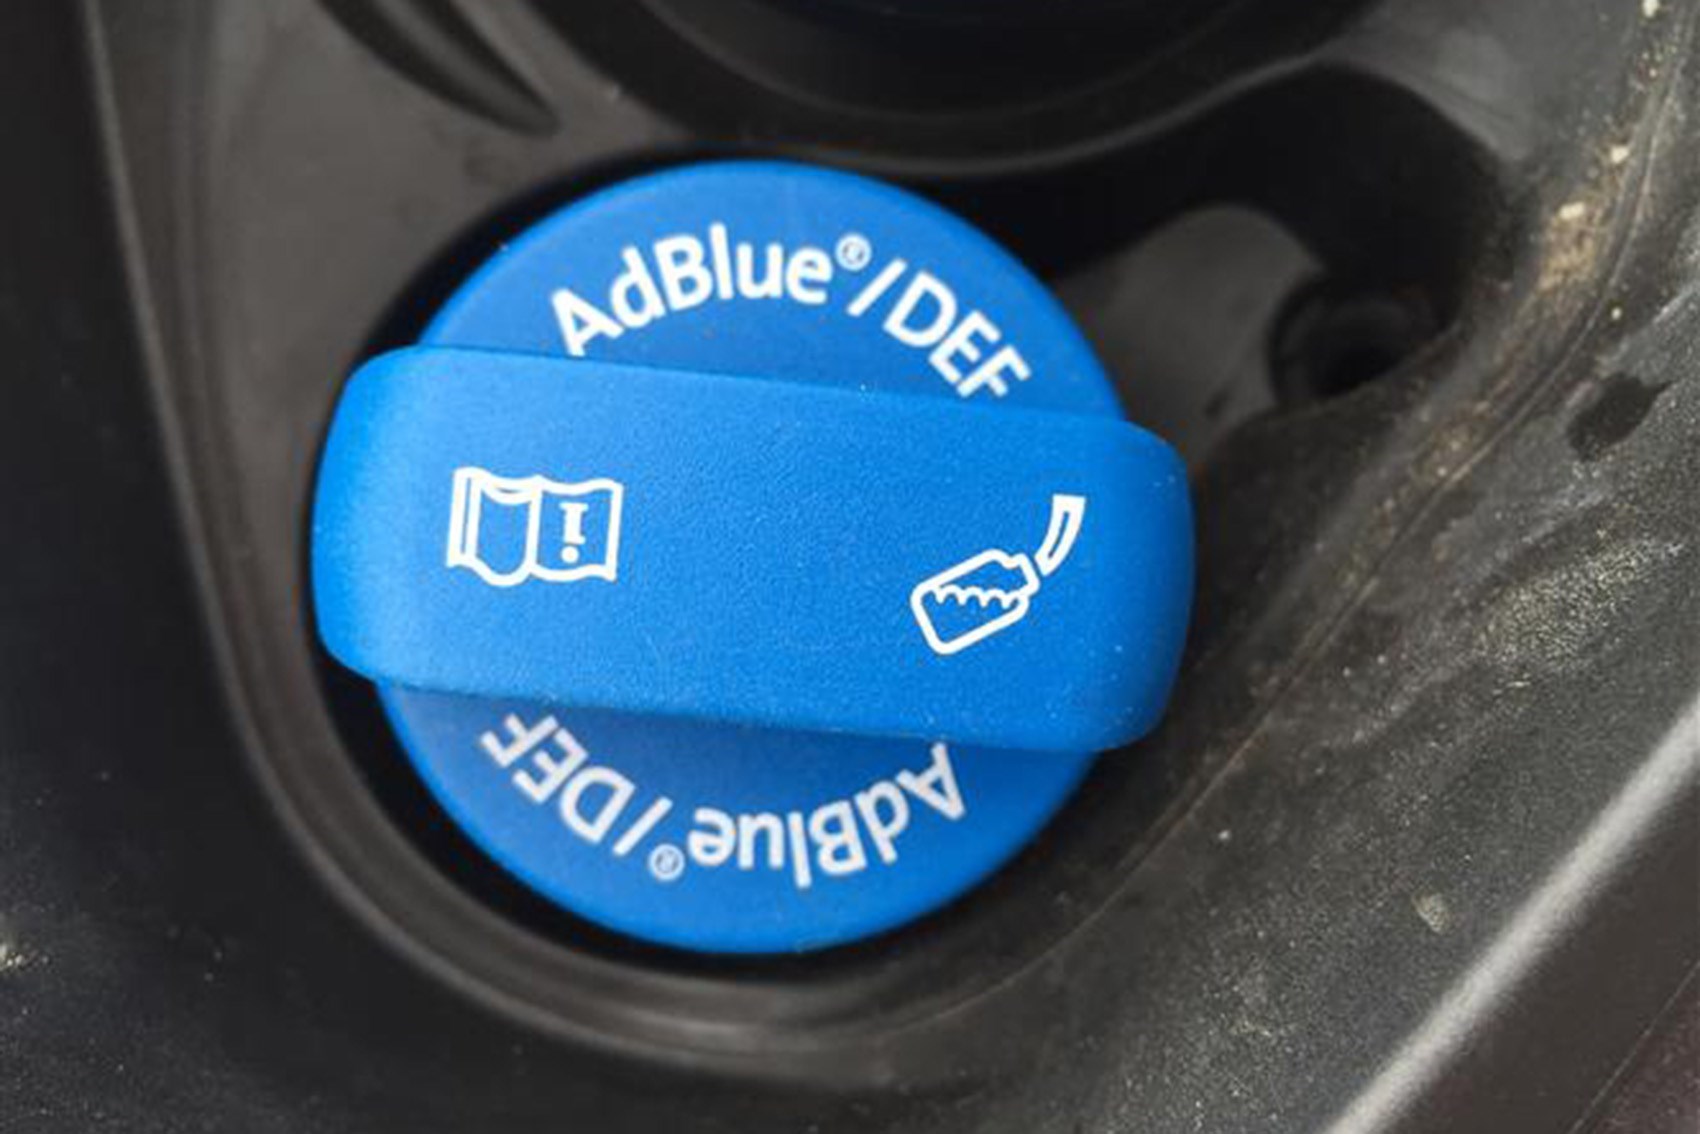 What is AdBlue